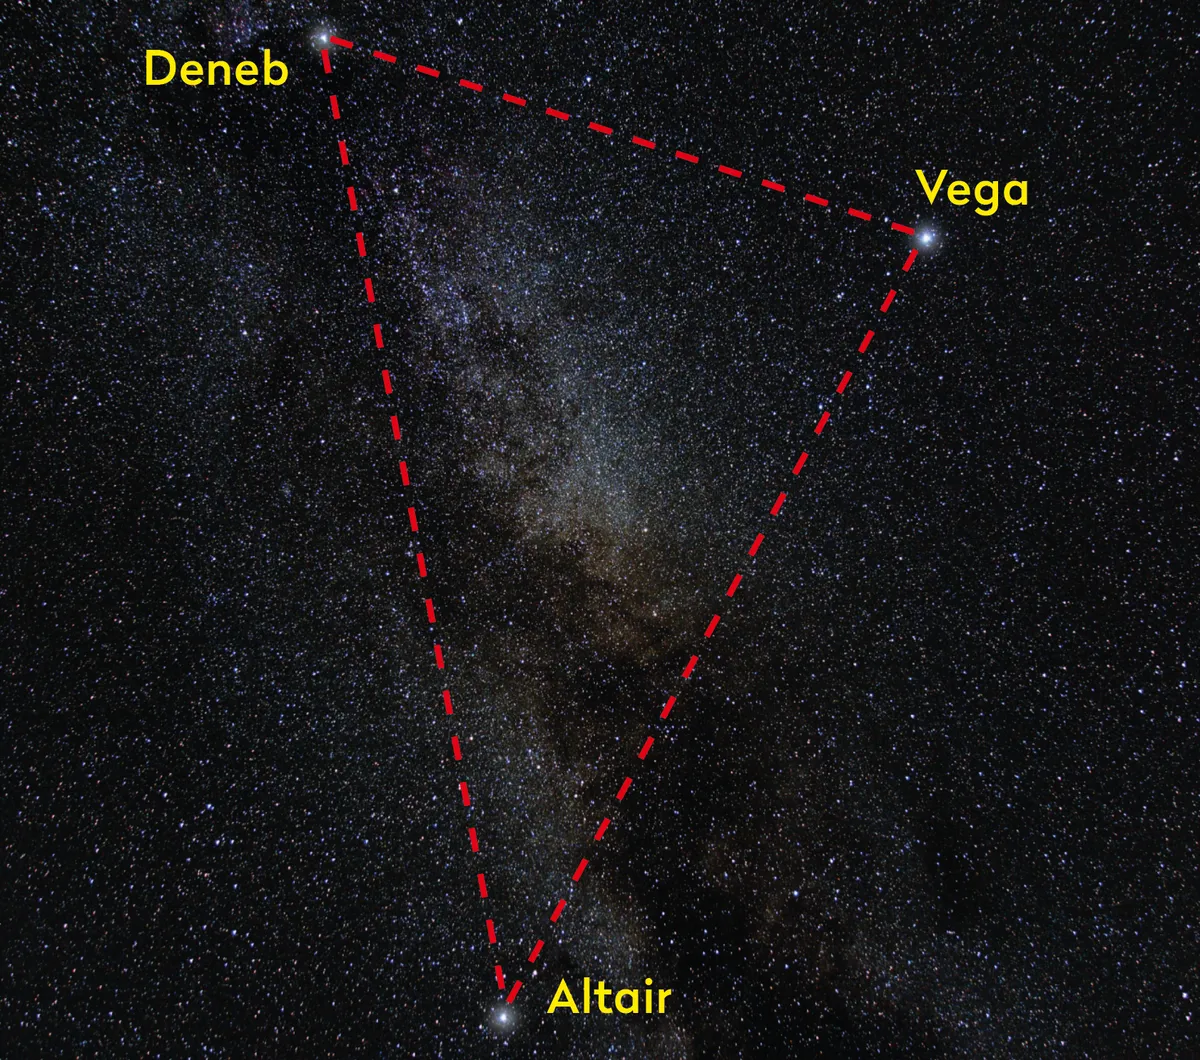 Summer Triangle. Credit: Pete Lawrence